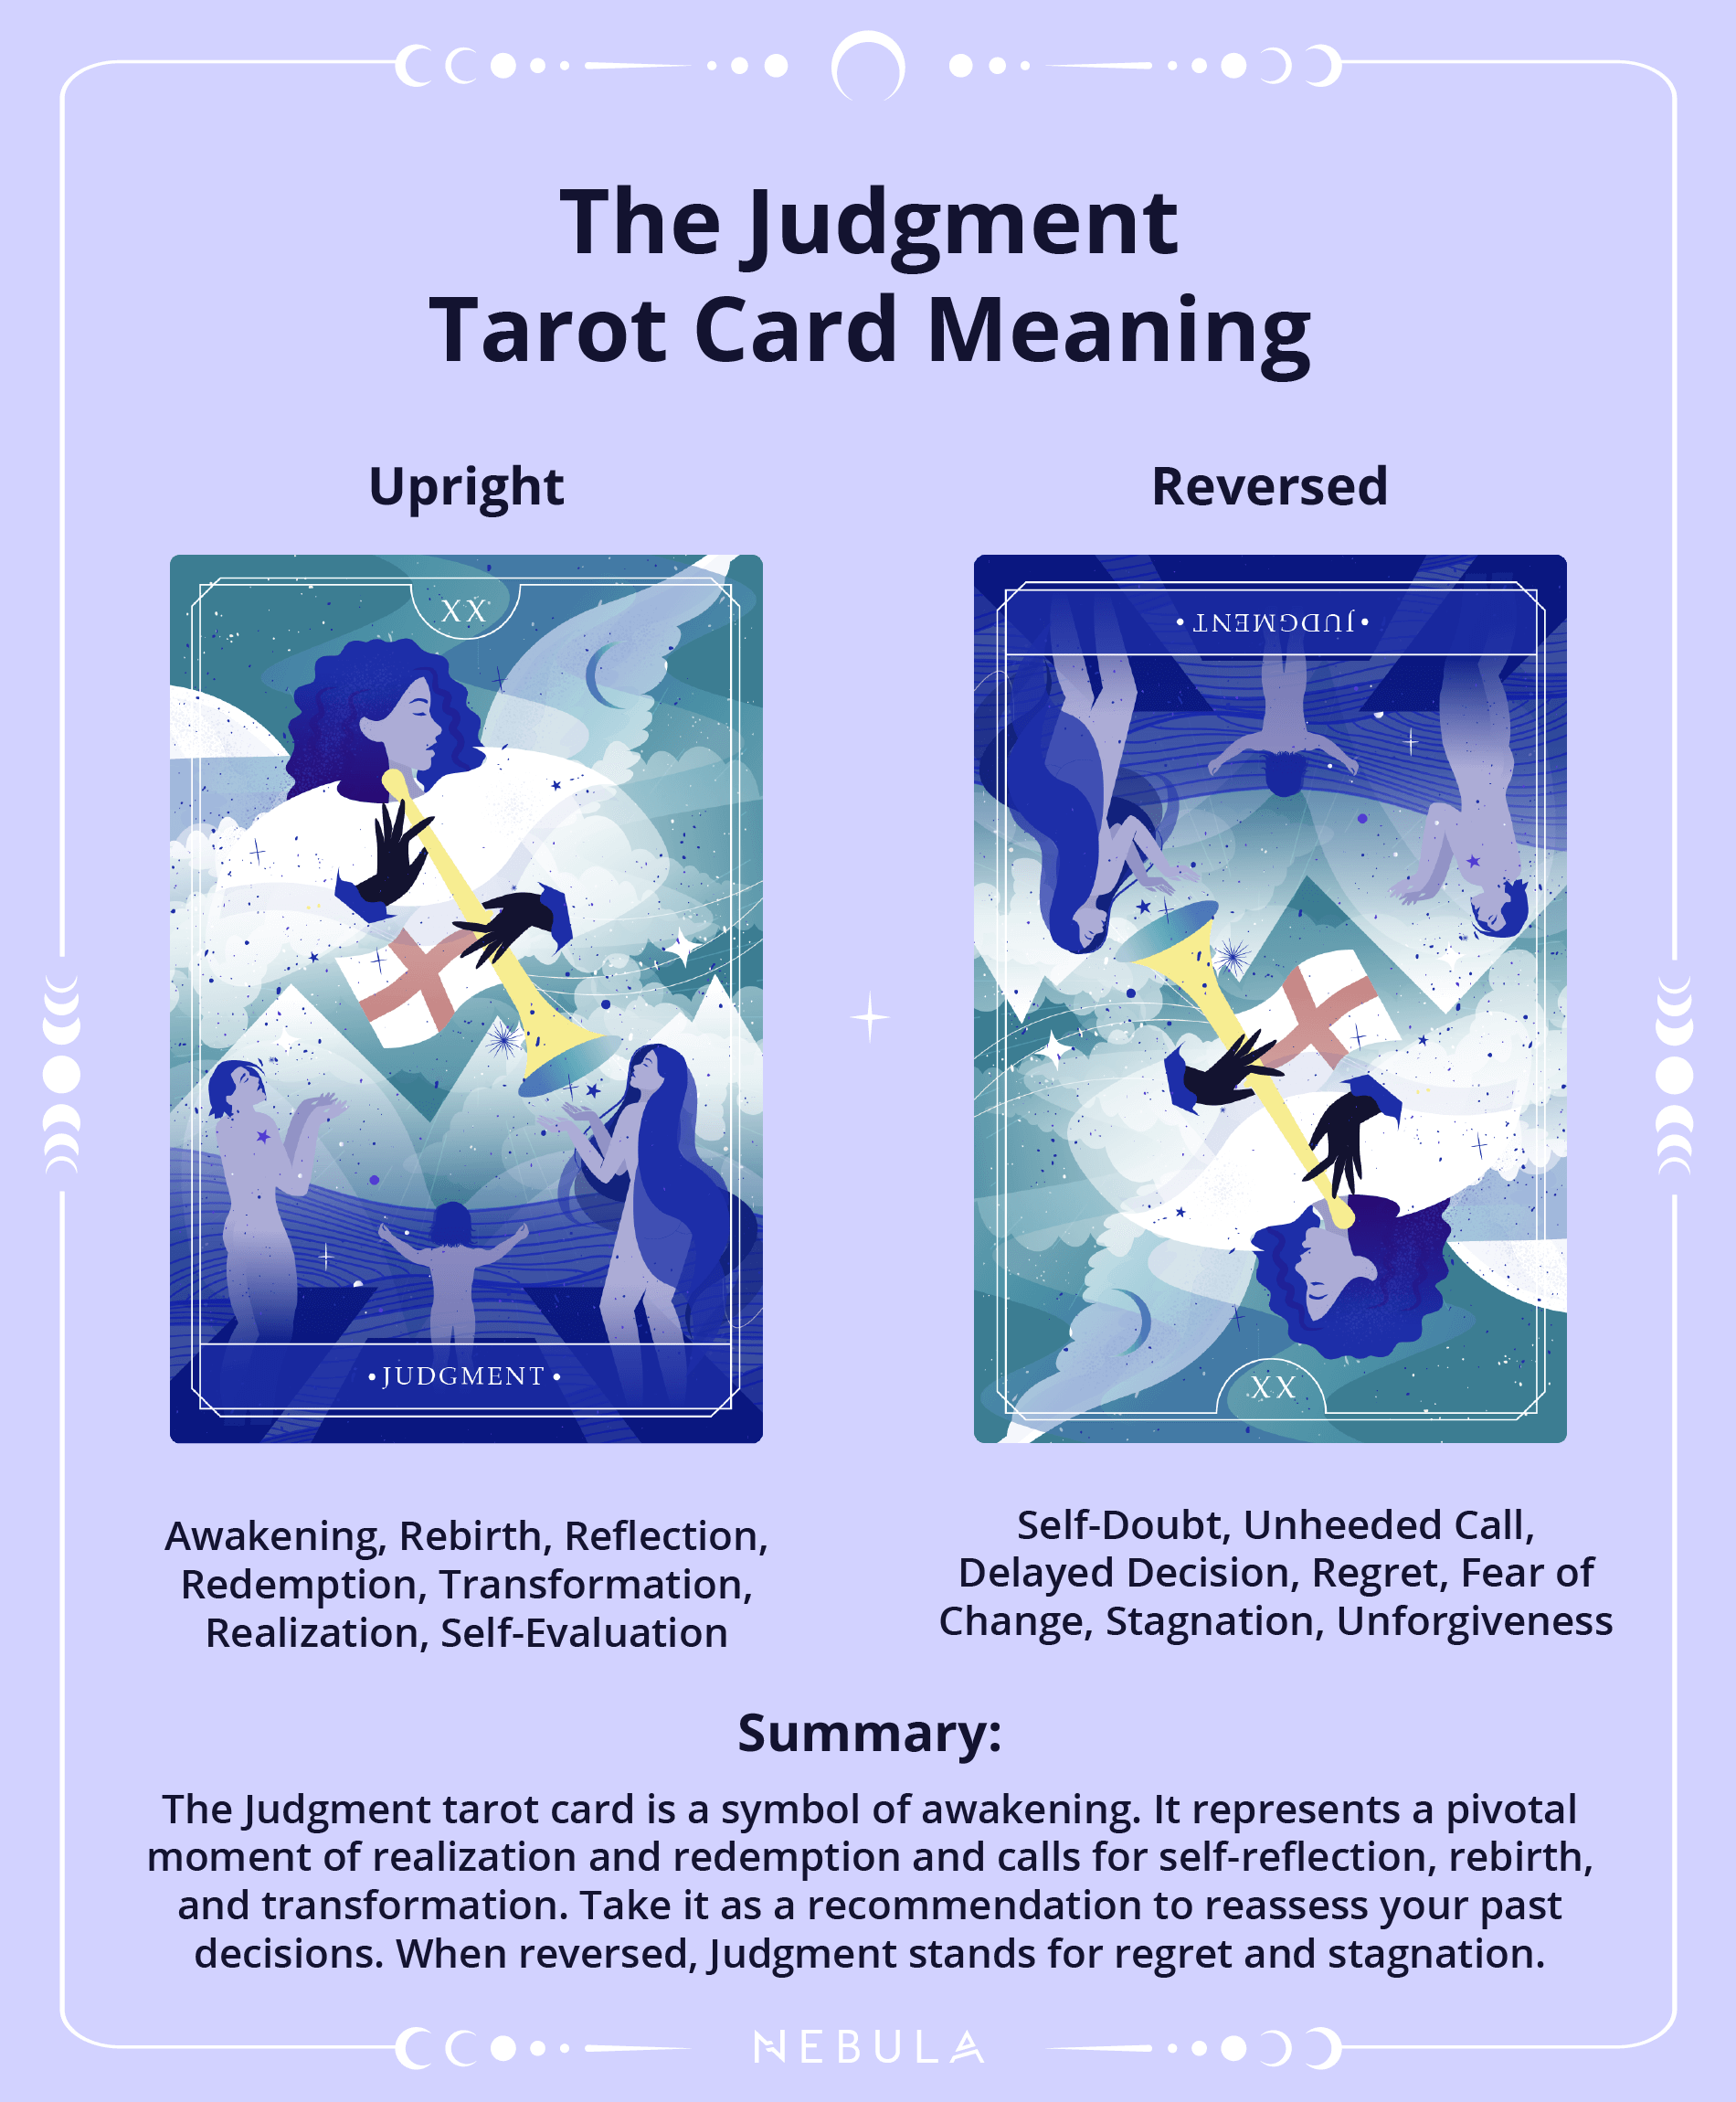 The Judgment Tarot Card Meaning